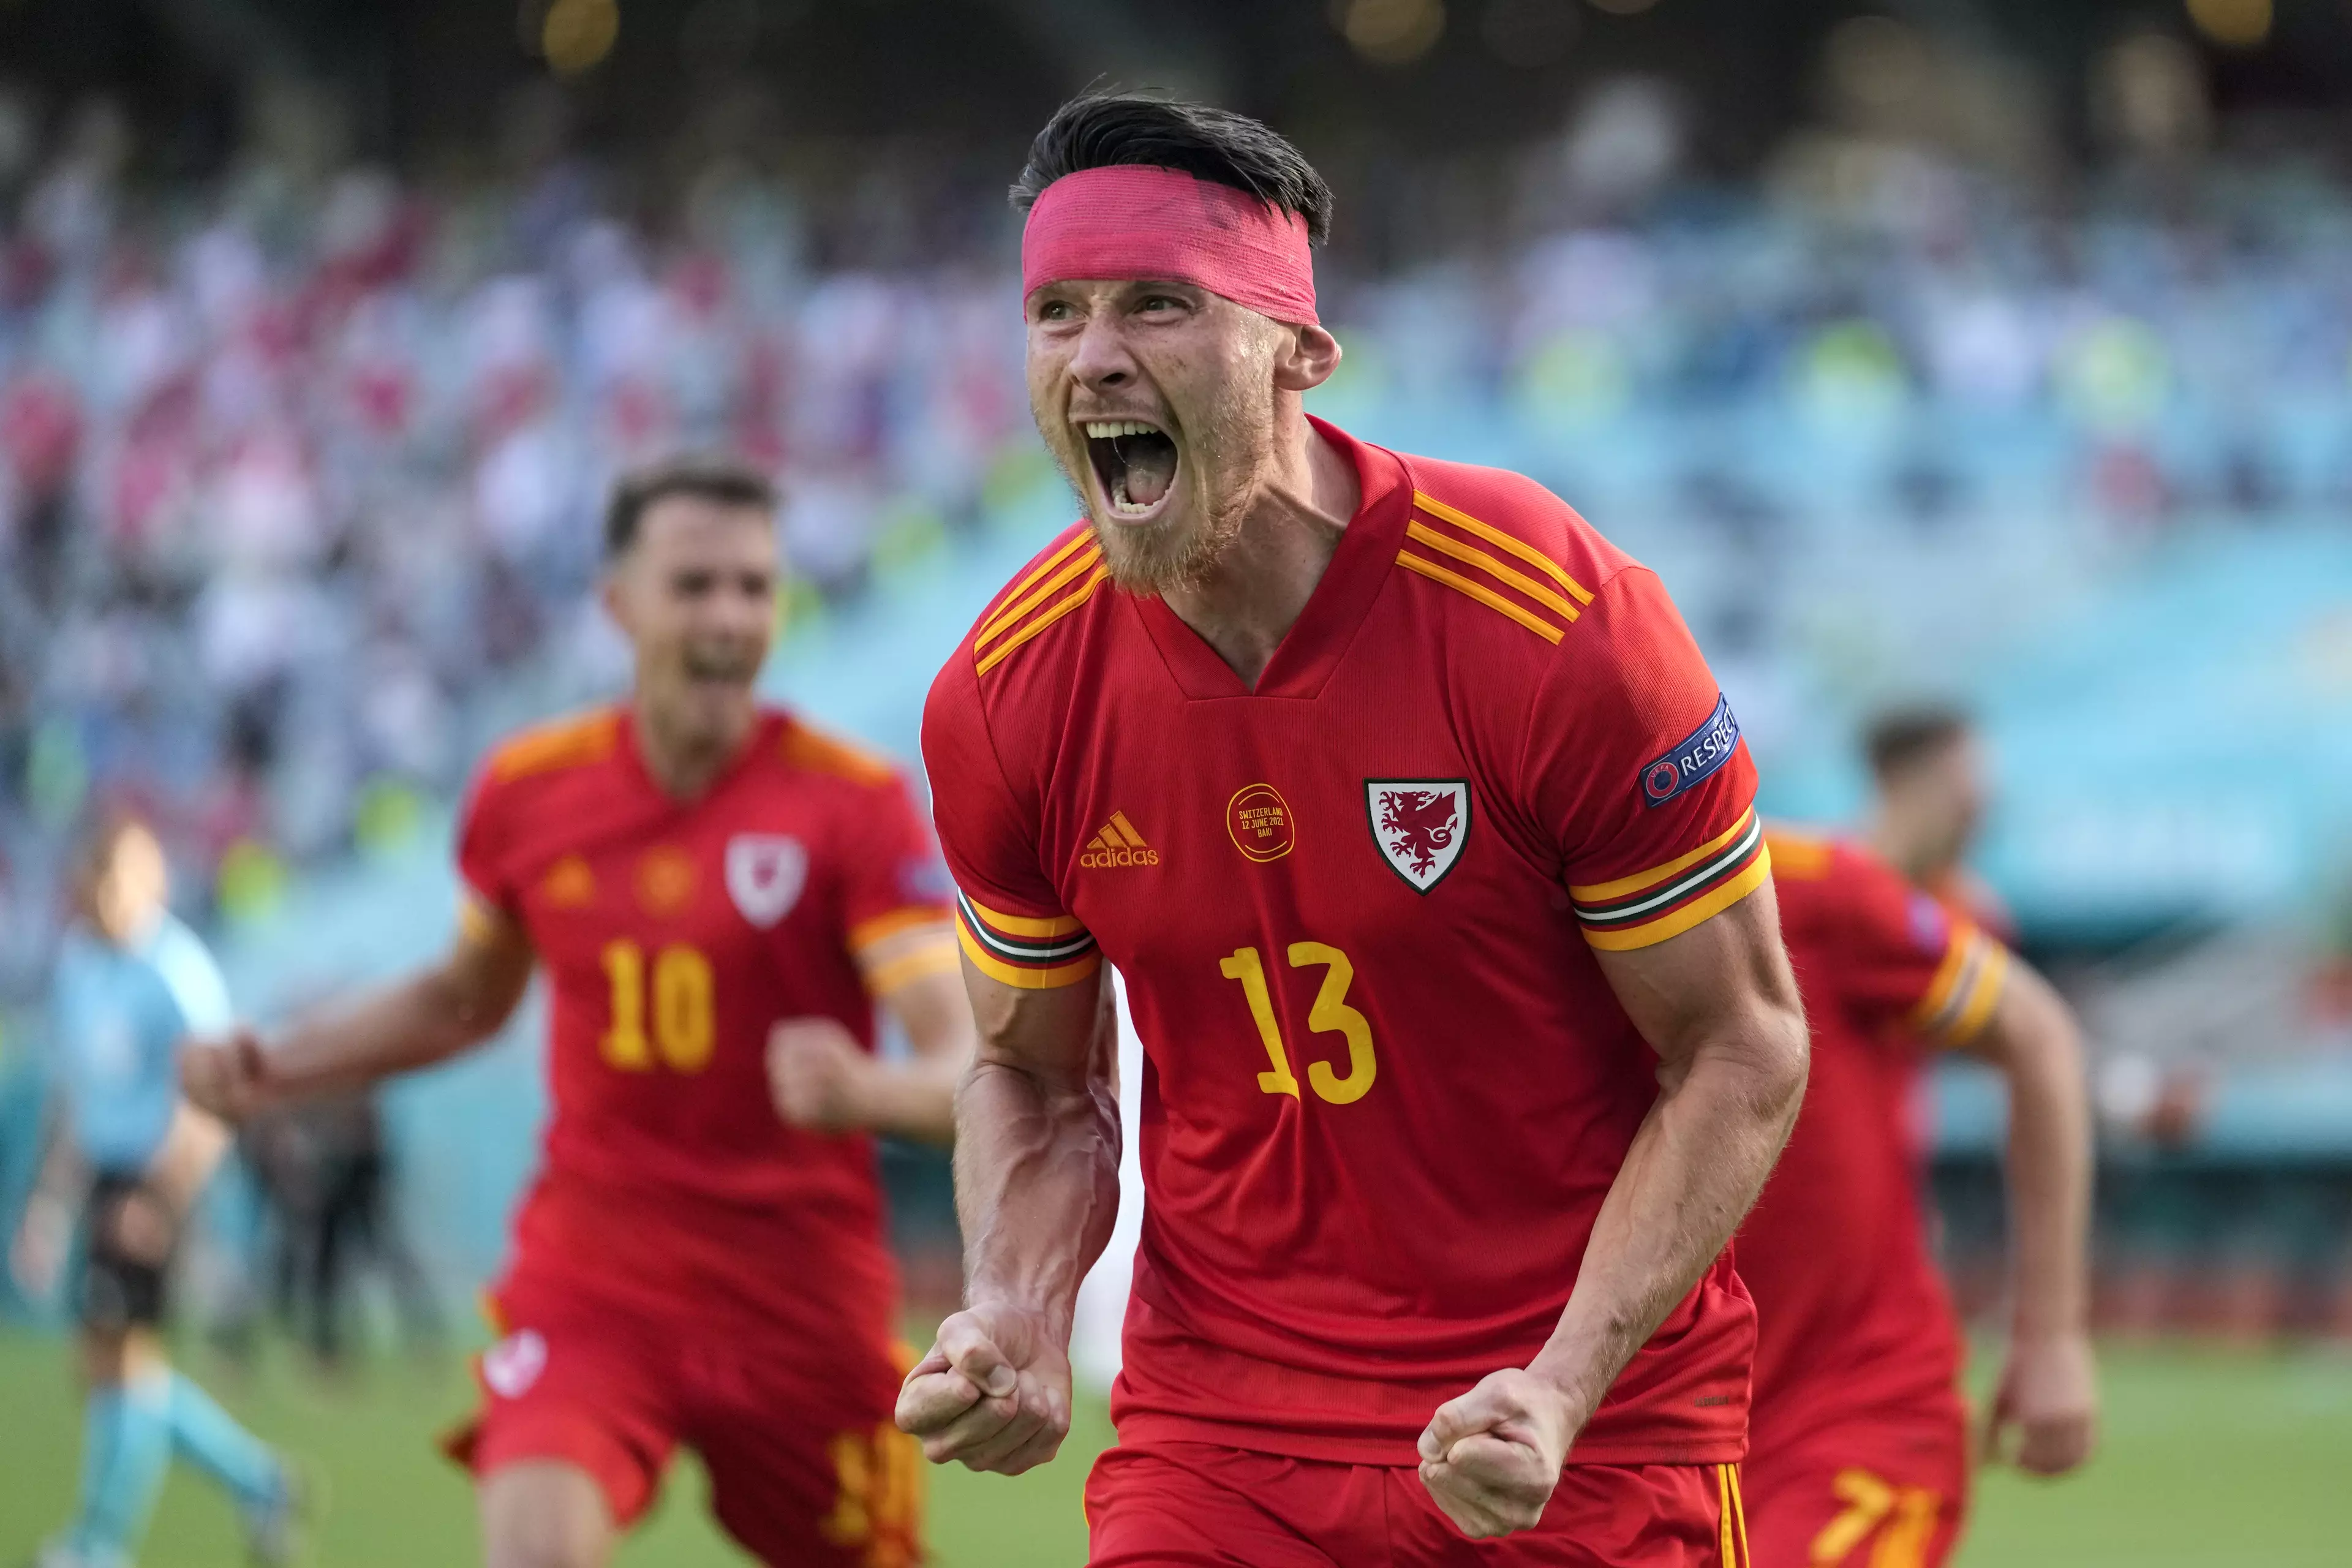 Wales' Kieffer Moore celebrates after scoring his side's opening goal during the Euro 2020 match between Wales and Switzerland.